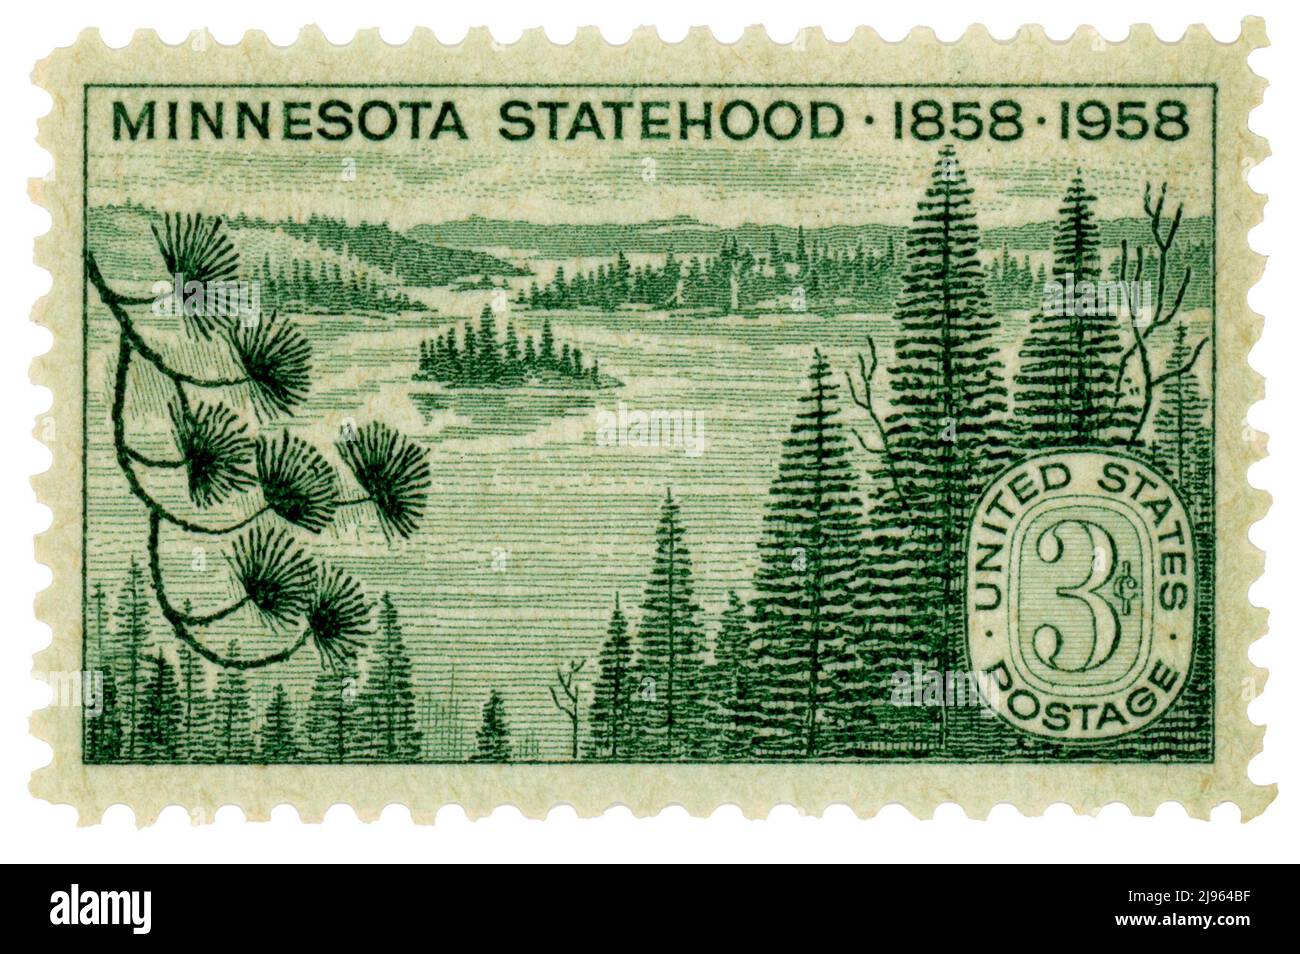 Commemorative stamp for Minnesota statehood issued 1958. Digitally edited scan of a small stamp allows reproduction as a beautifully enlarged art work. Stock Photo